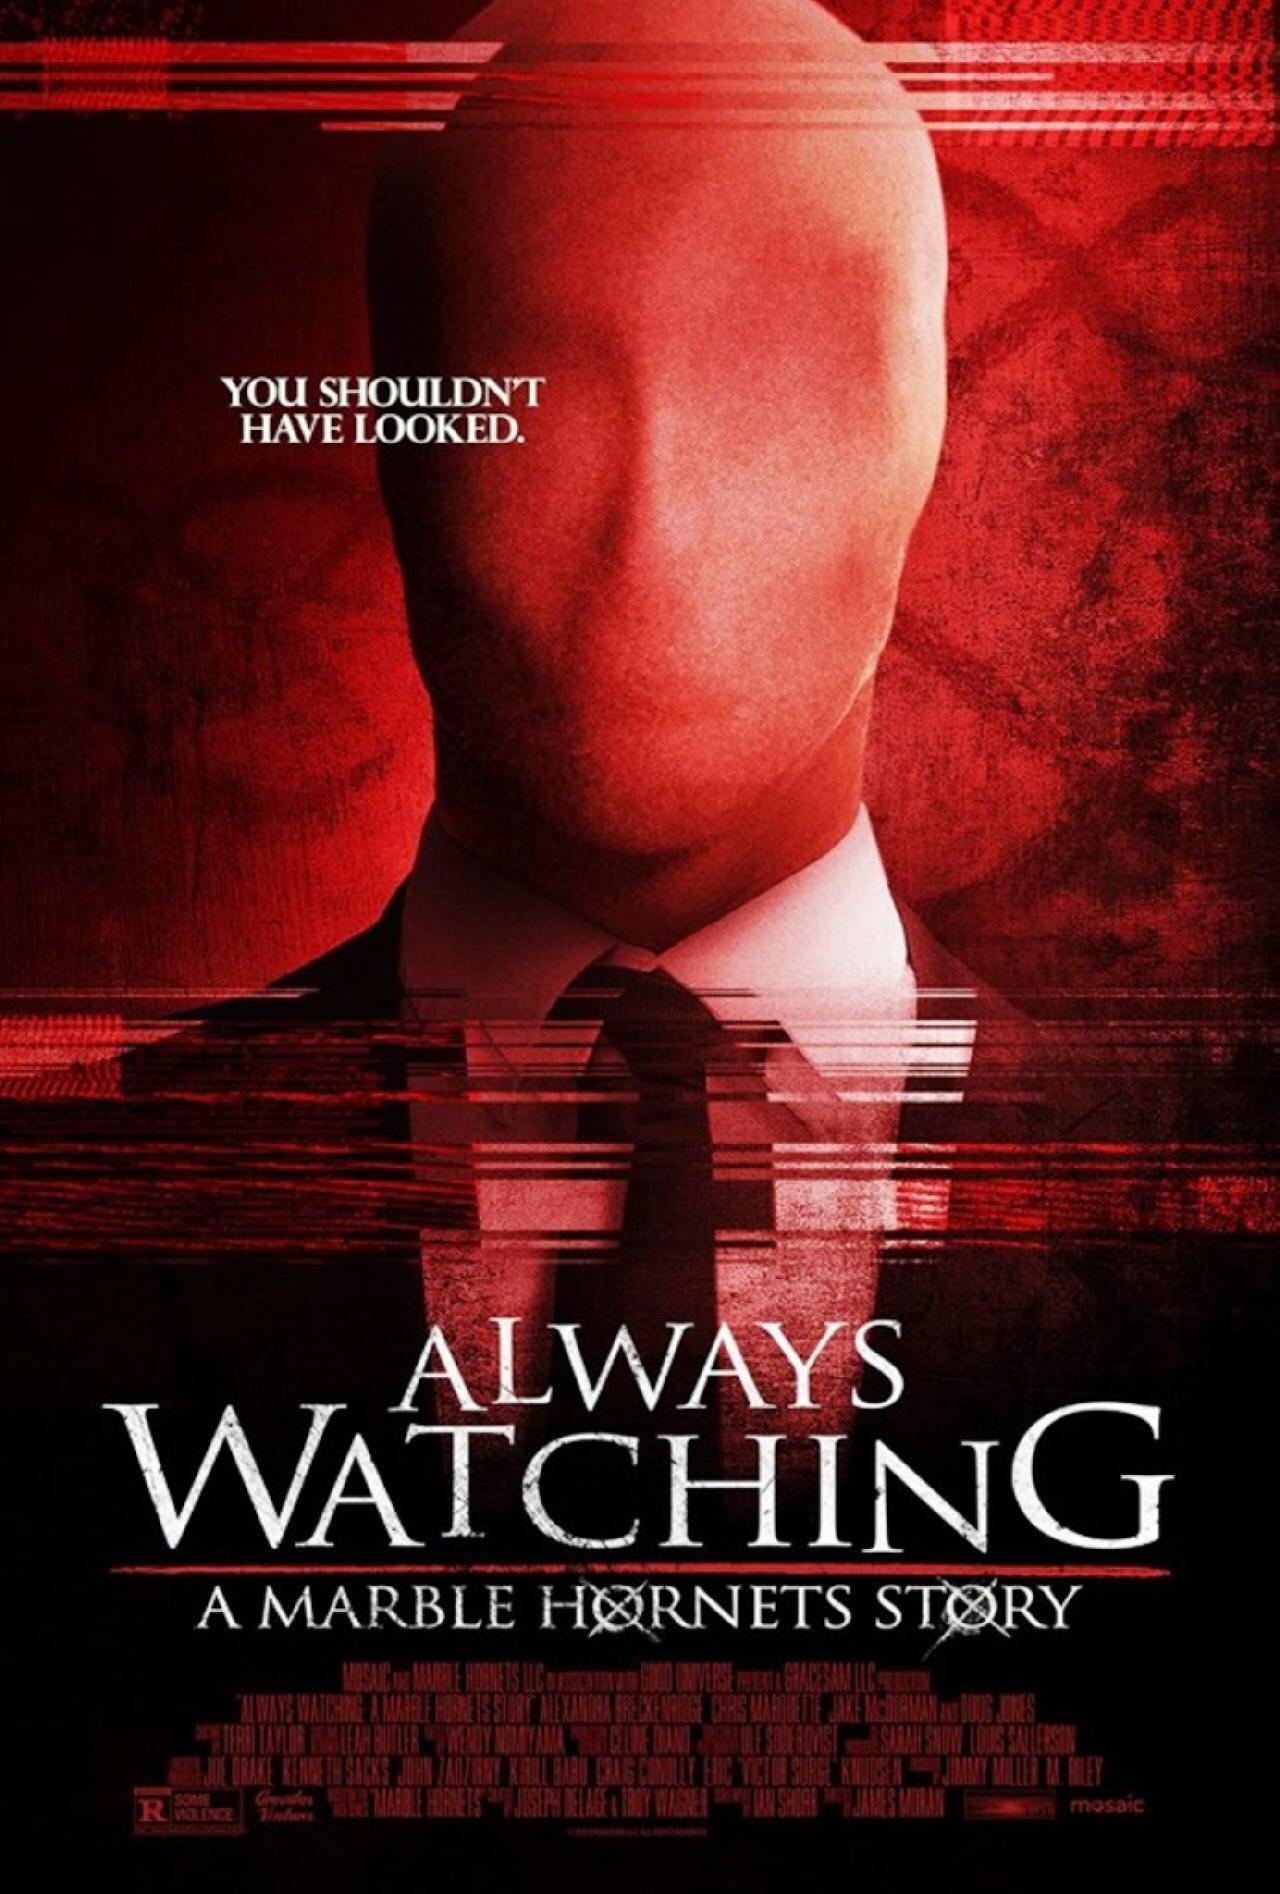 Always Watching: A Marble Hornets Story poster